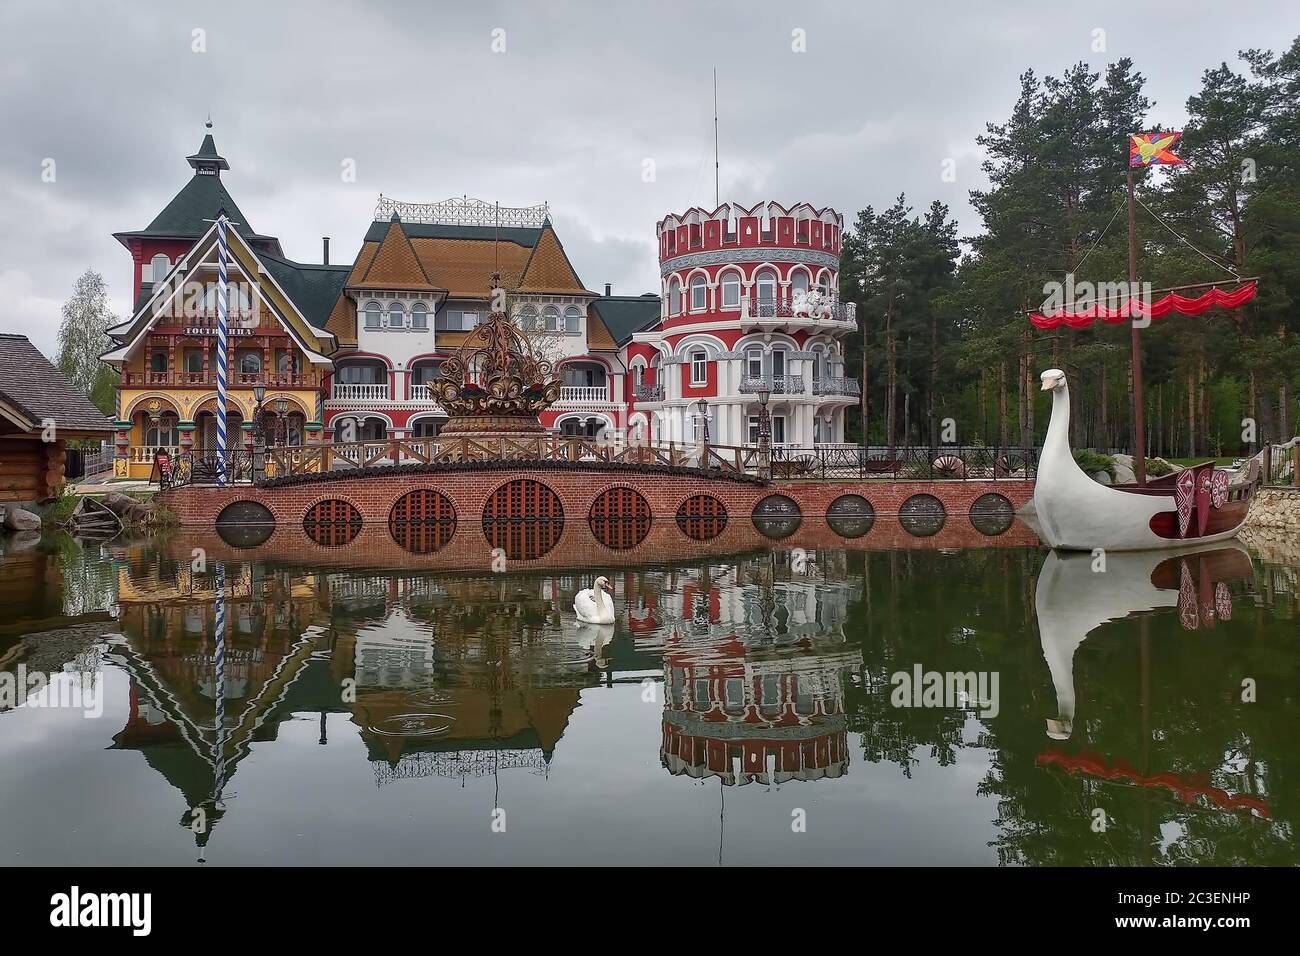 Ryazan, Russia - April 14, 2019: Bridge and lake of Ethnic hotel 'Как v staroy skazke' in Russian style. Hotel 'Like an old fairy tale.' Made in the ethnic Russian style and located in the forest. Stock Photo